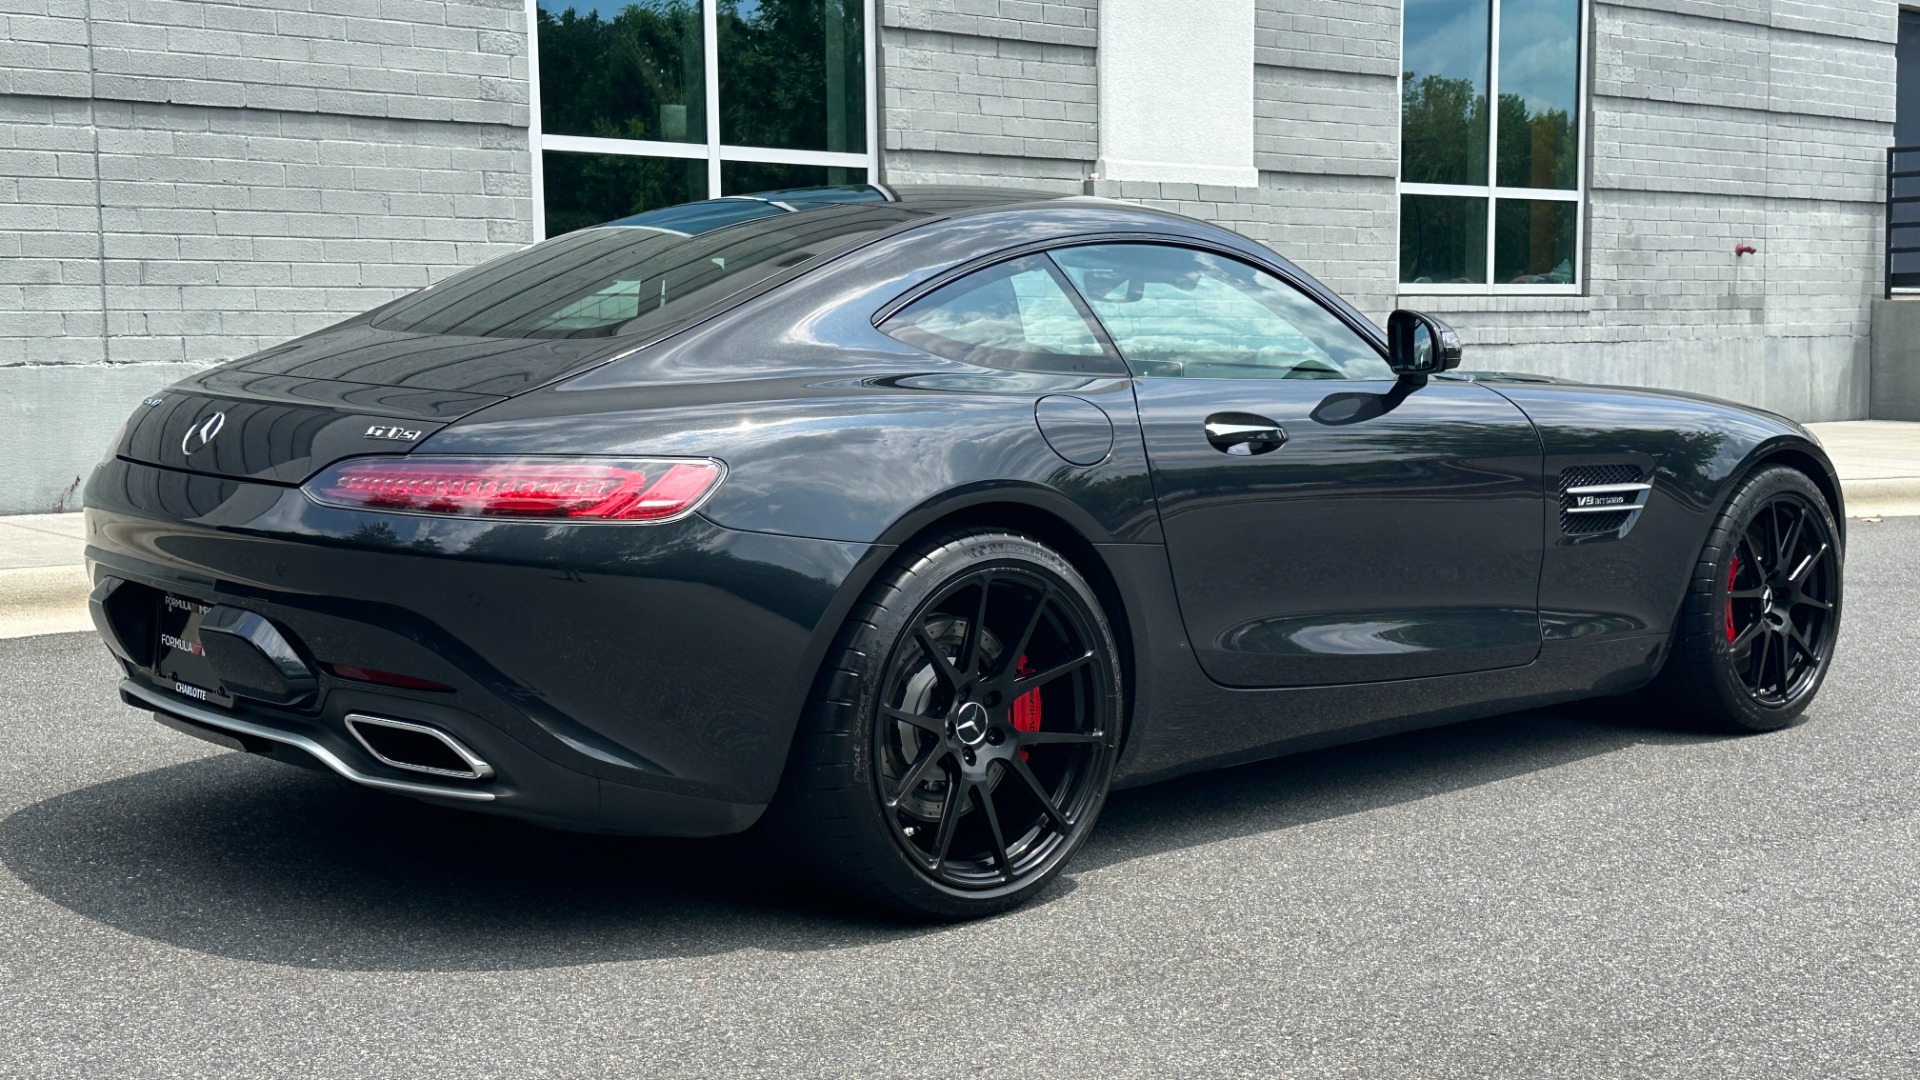 Used 2016 Mercedes-Benz AMG GT S / CARBON FIBER / EXCLUSIVE INTERIOR / RED CALIPERS / GLASS ROOF for sale Sold at Formula Imports in Charlotte NC 28227 4